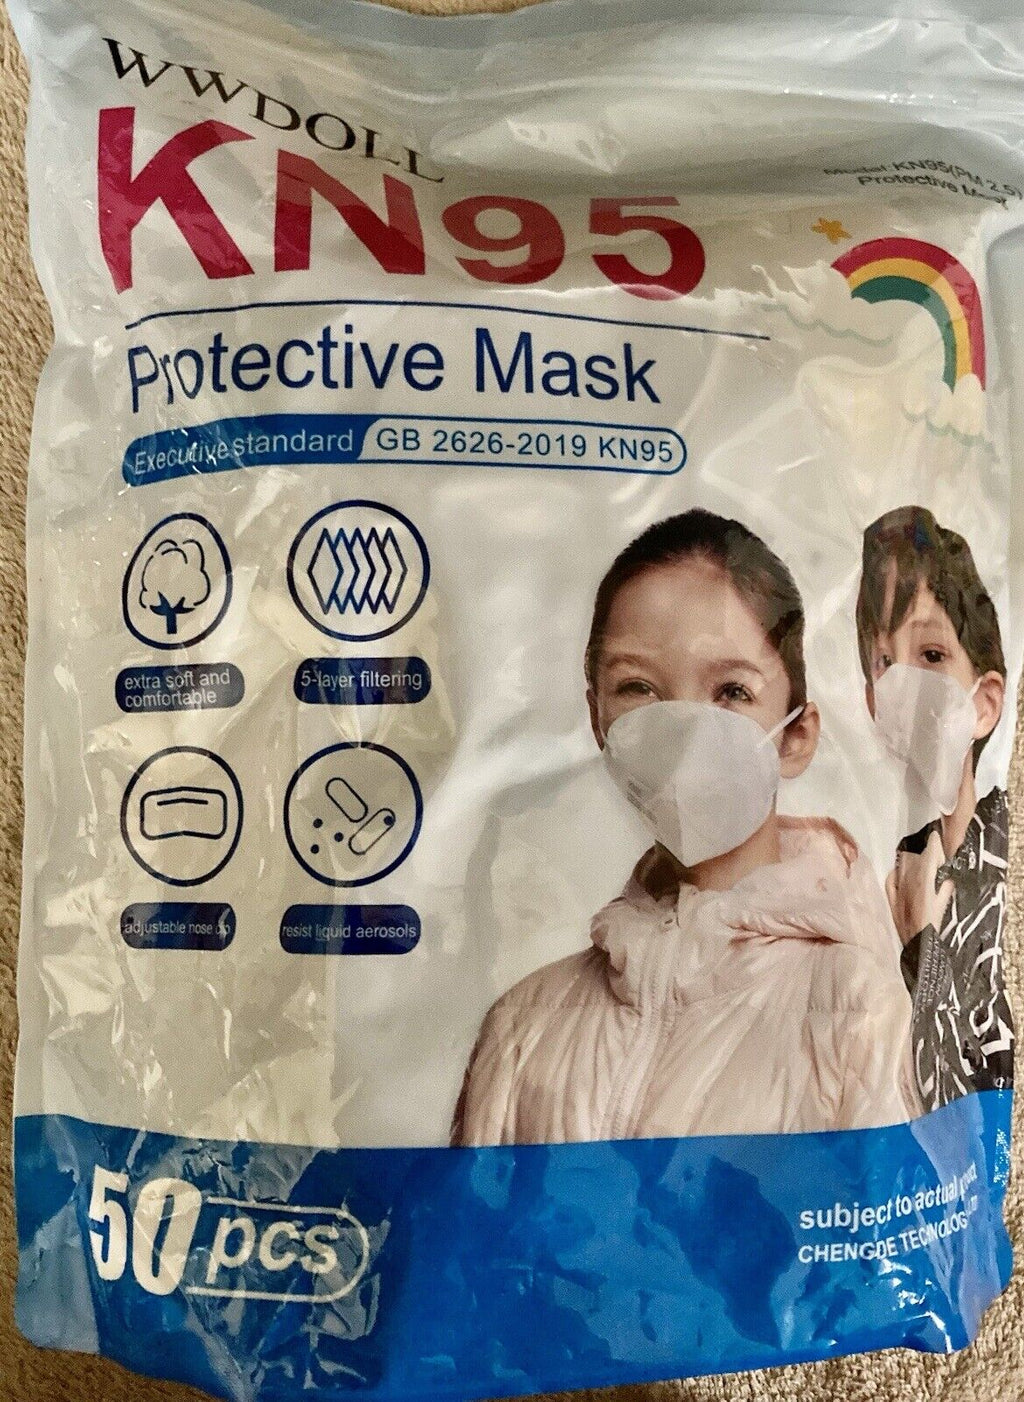 Disposable Face Mask 50 Pcs Gray 5-Ply Protection for Kids WWDOLL KN95 Children